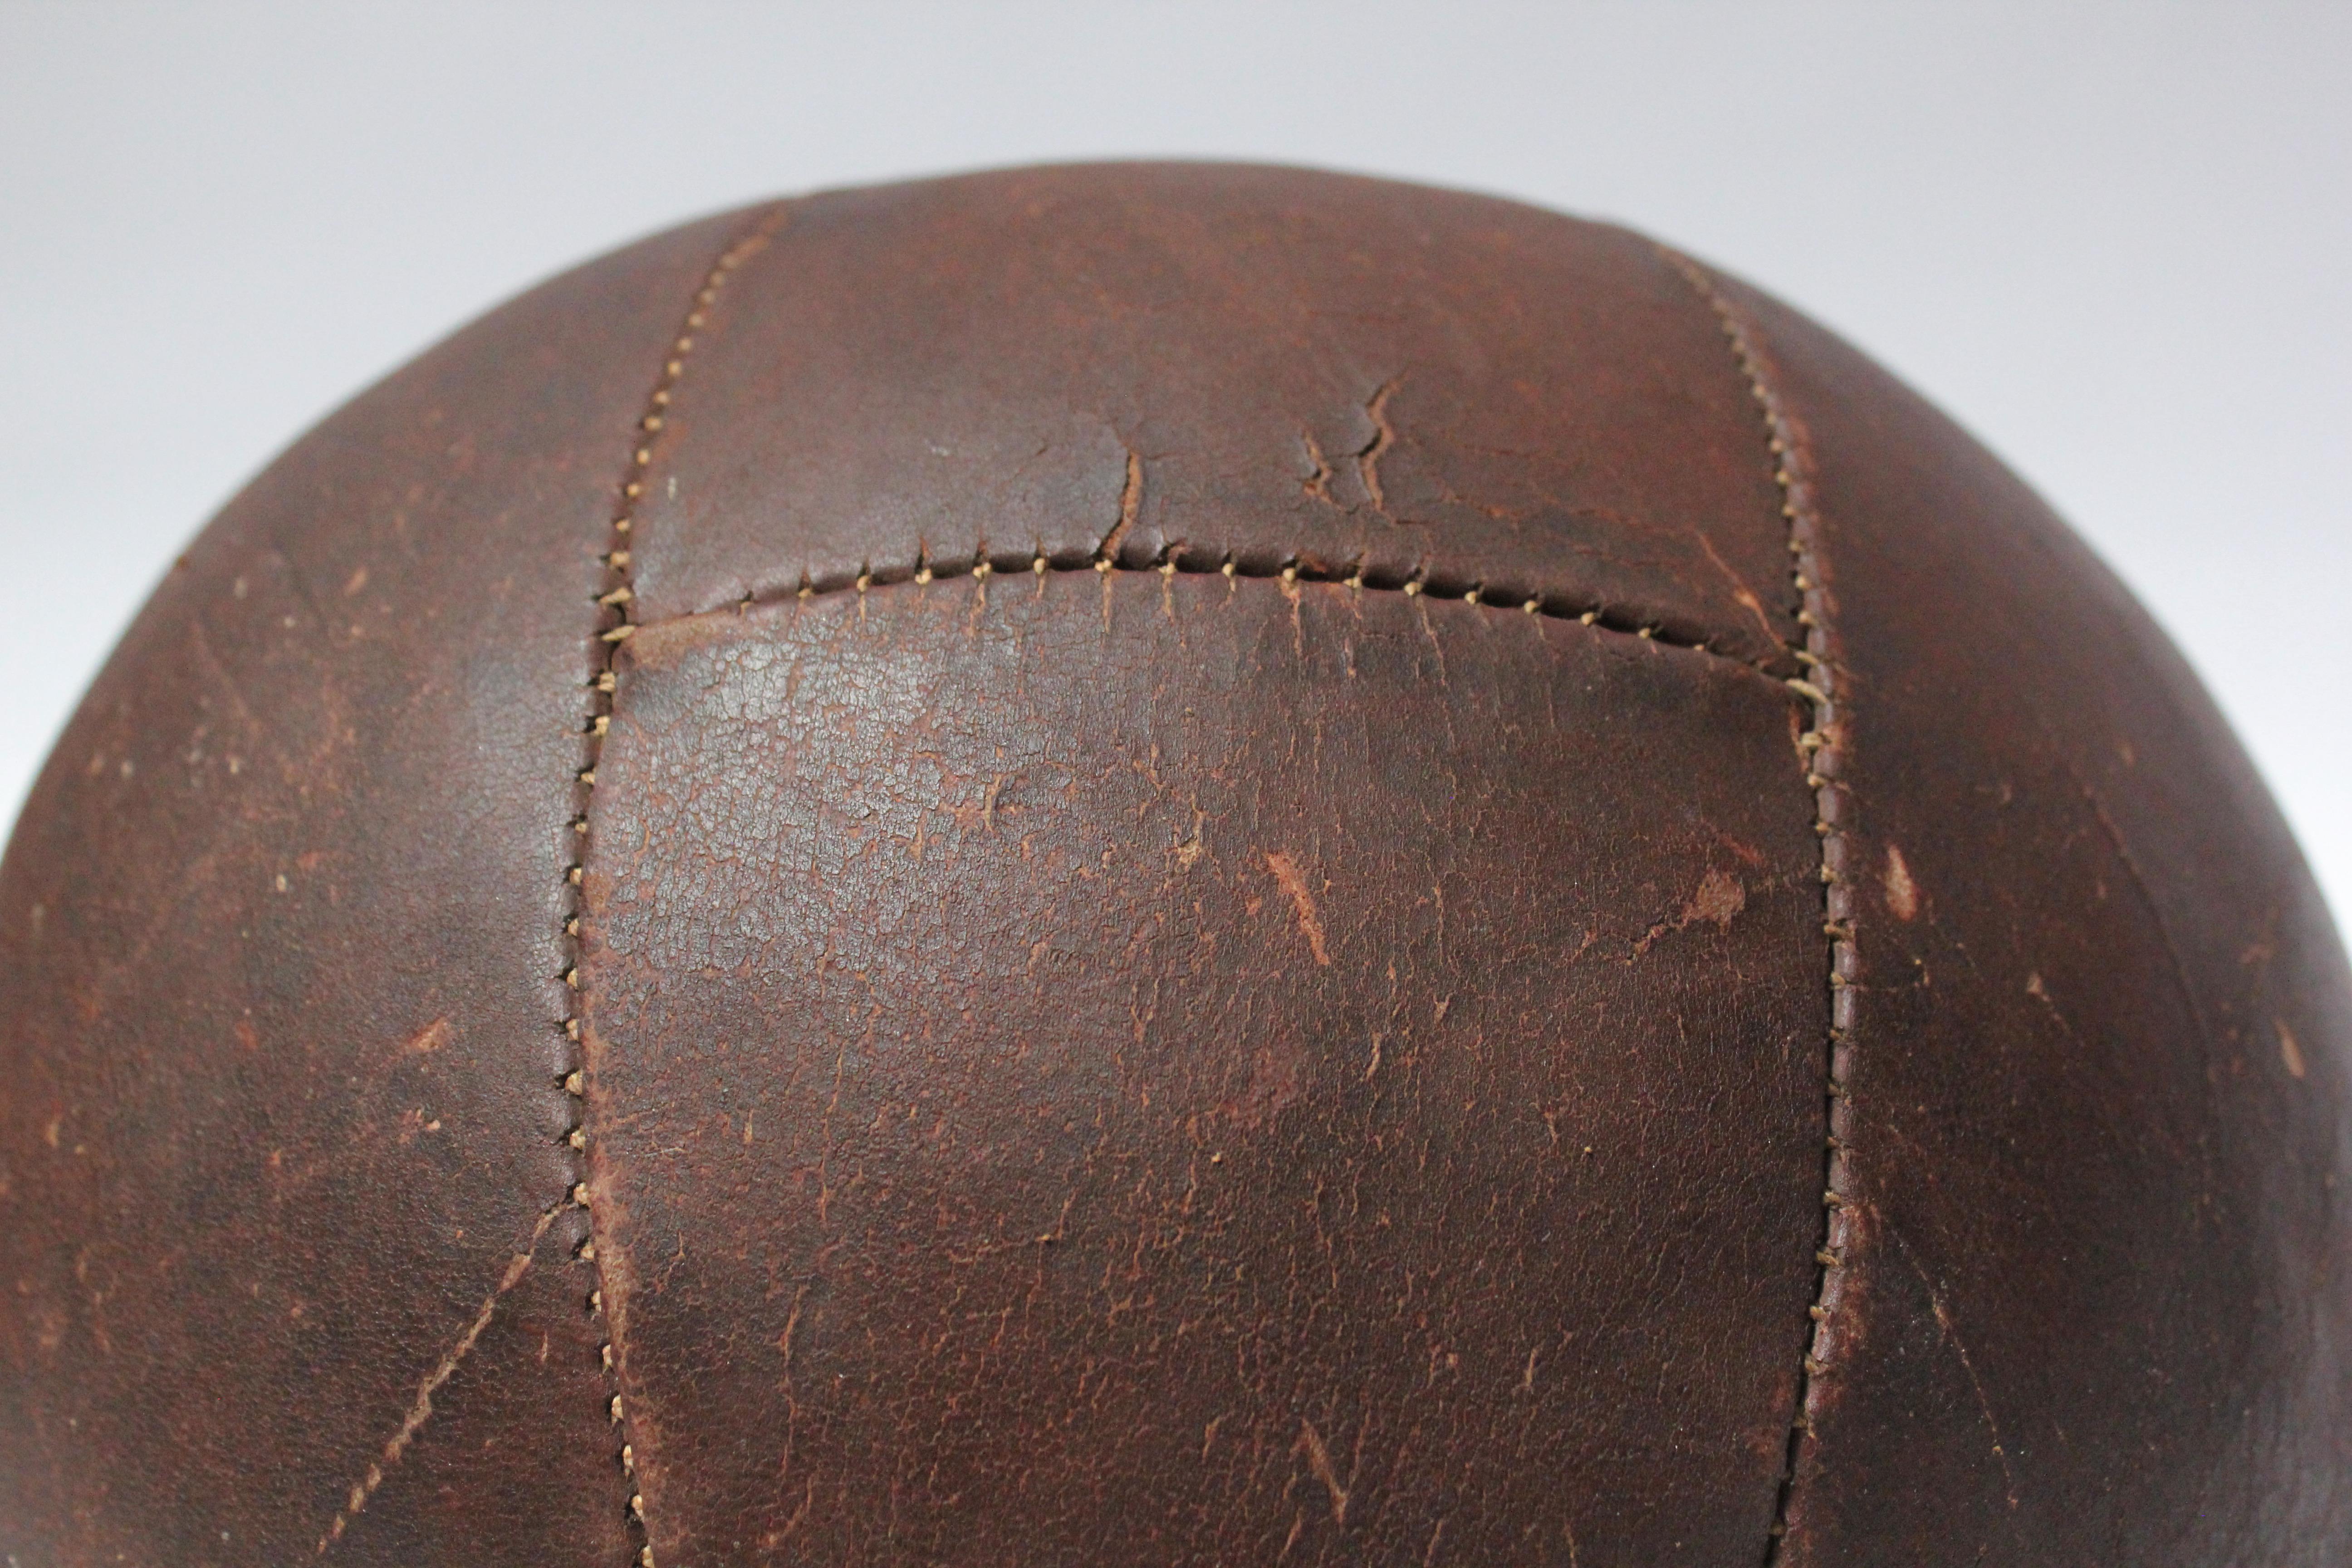 Vintage Hand-Stitched Four Pound Leather Medicine Ball 6